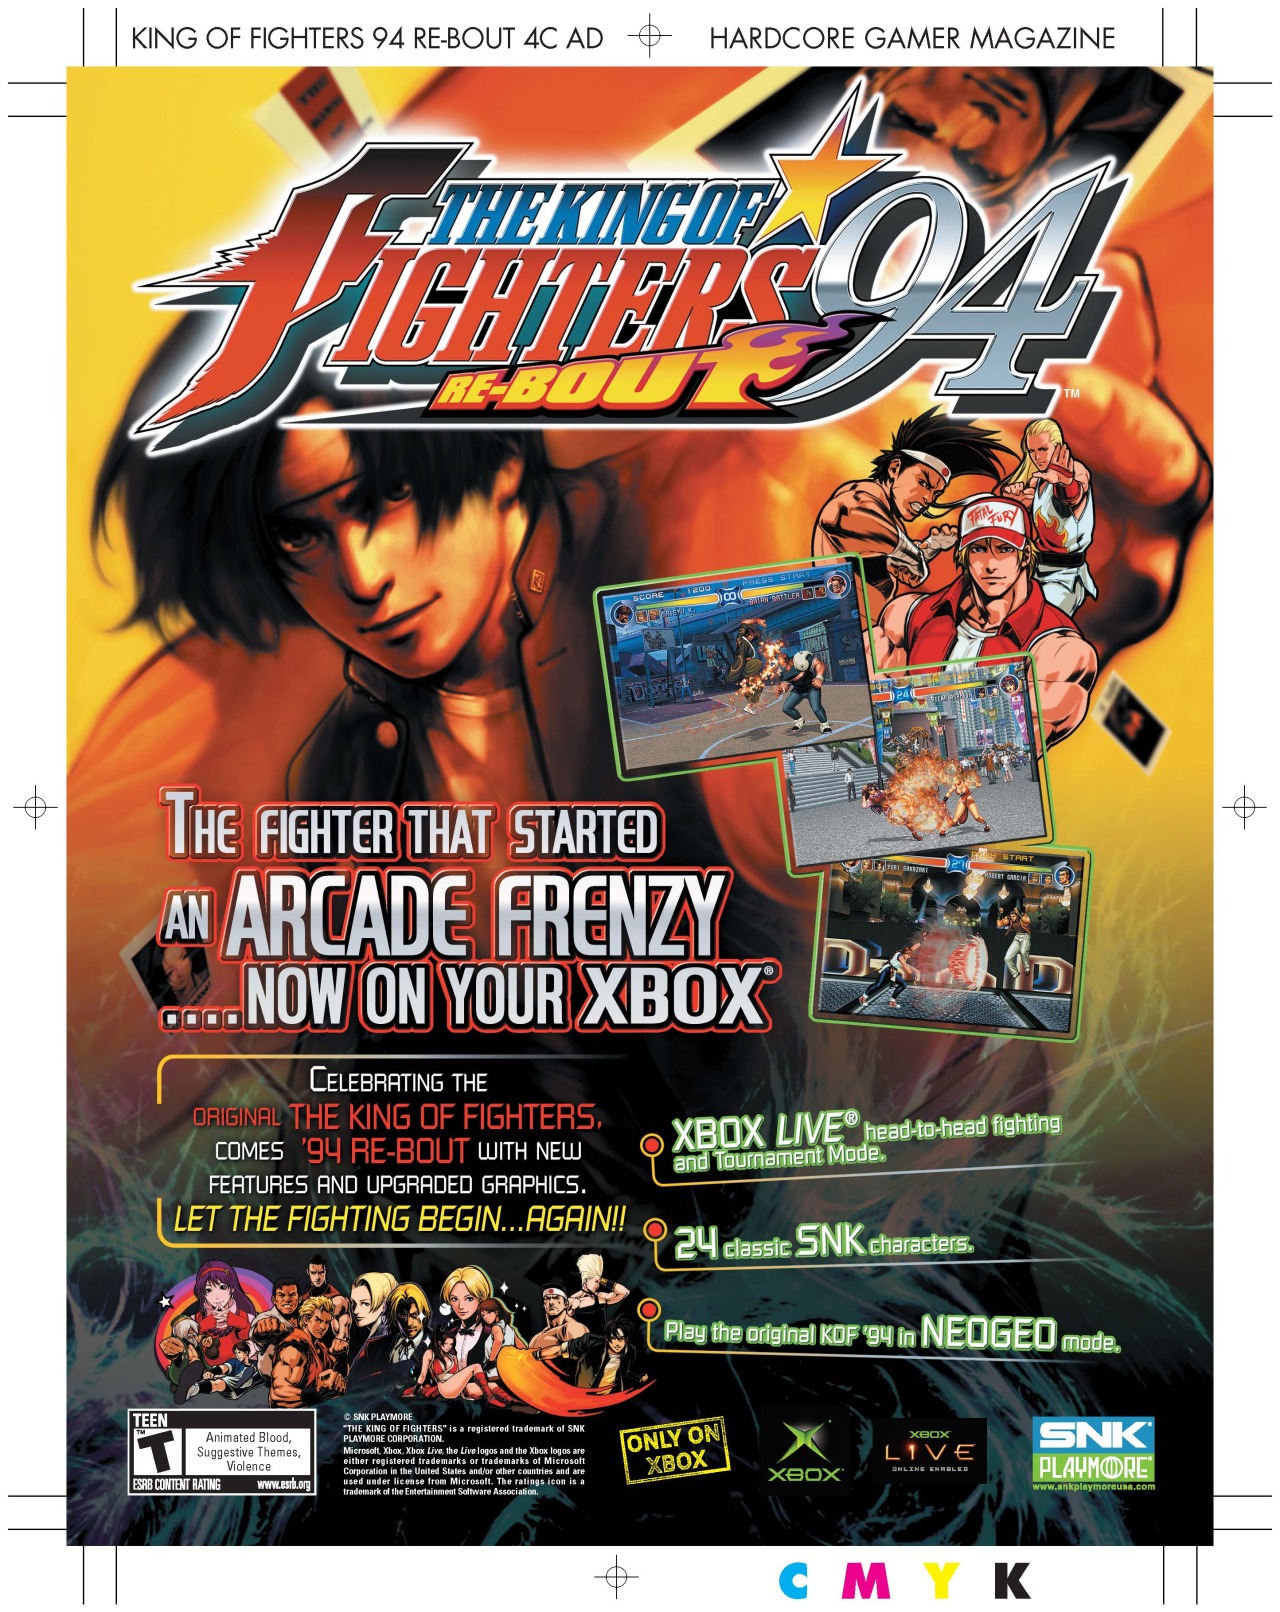 ‘The King of Fighters ‘94: Re-Bout’[XBOX] [USA] [MAGAZINE, LAYOUT] [2004]
• via @djpubba